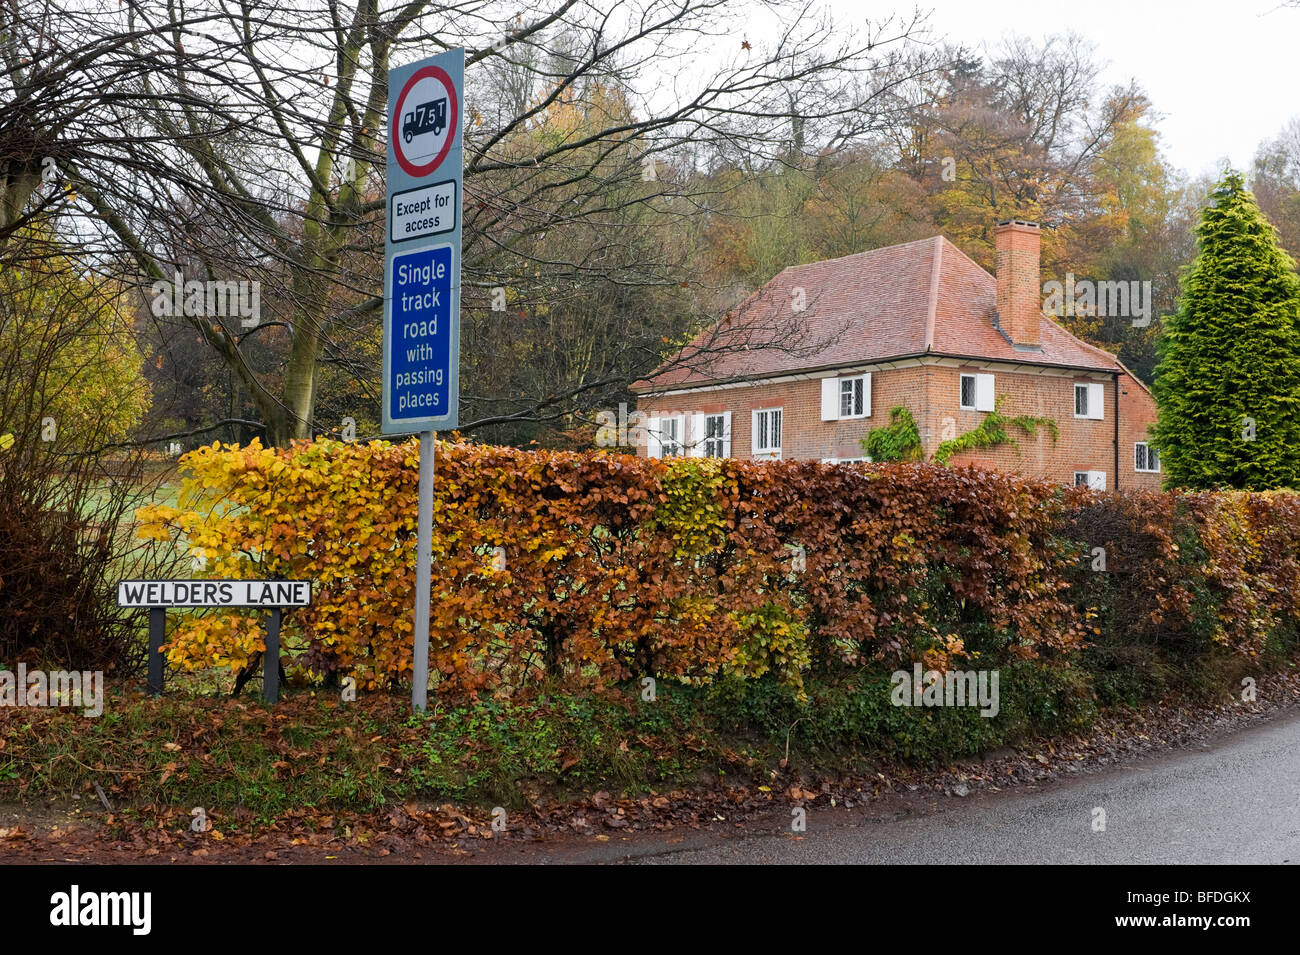 Quaker meeting house and single track road sign at the junction of Welders Lane and Jordans Lane Bucks UK Stock Photo